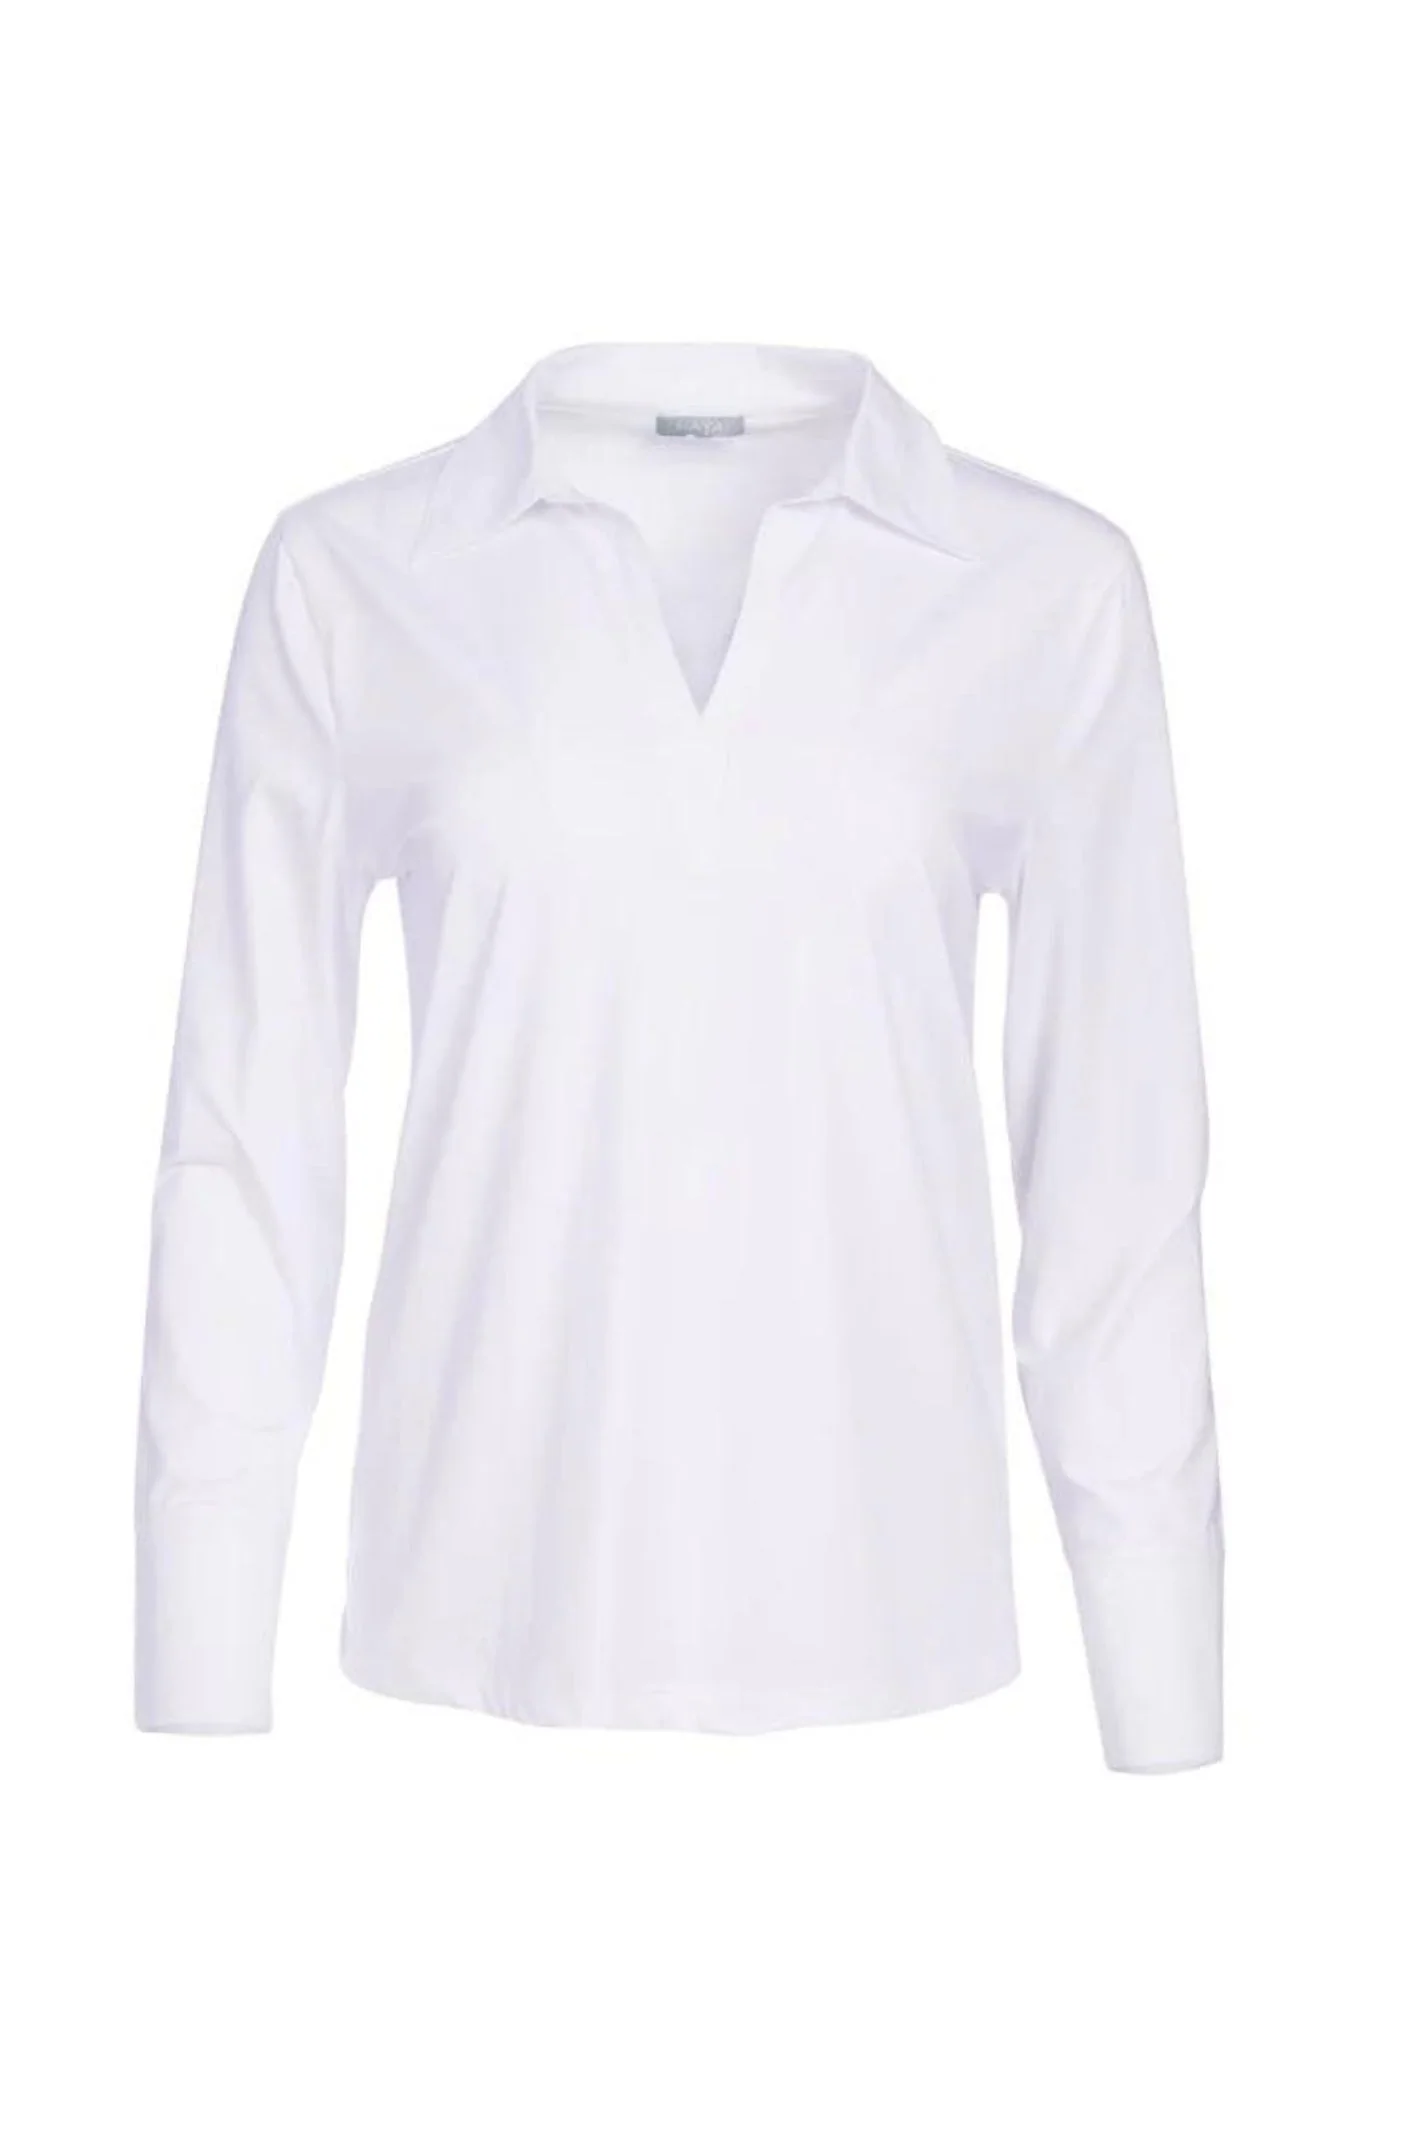 Naya NAW23 108 White Collar and Cuff Top Experiene Boutique